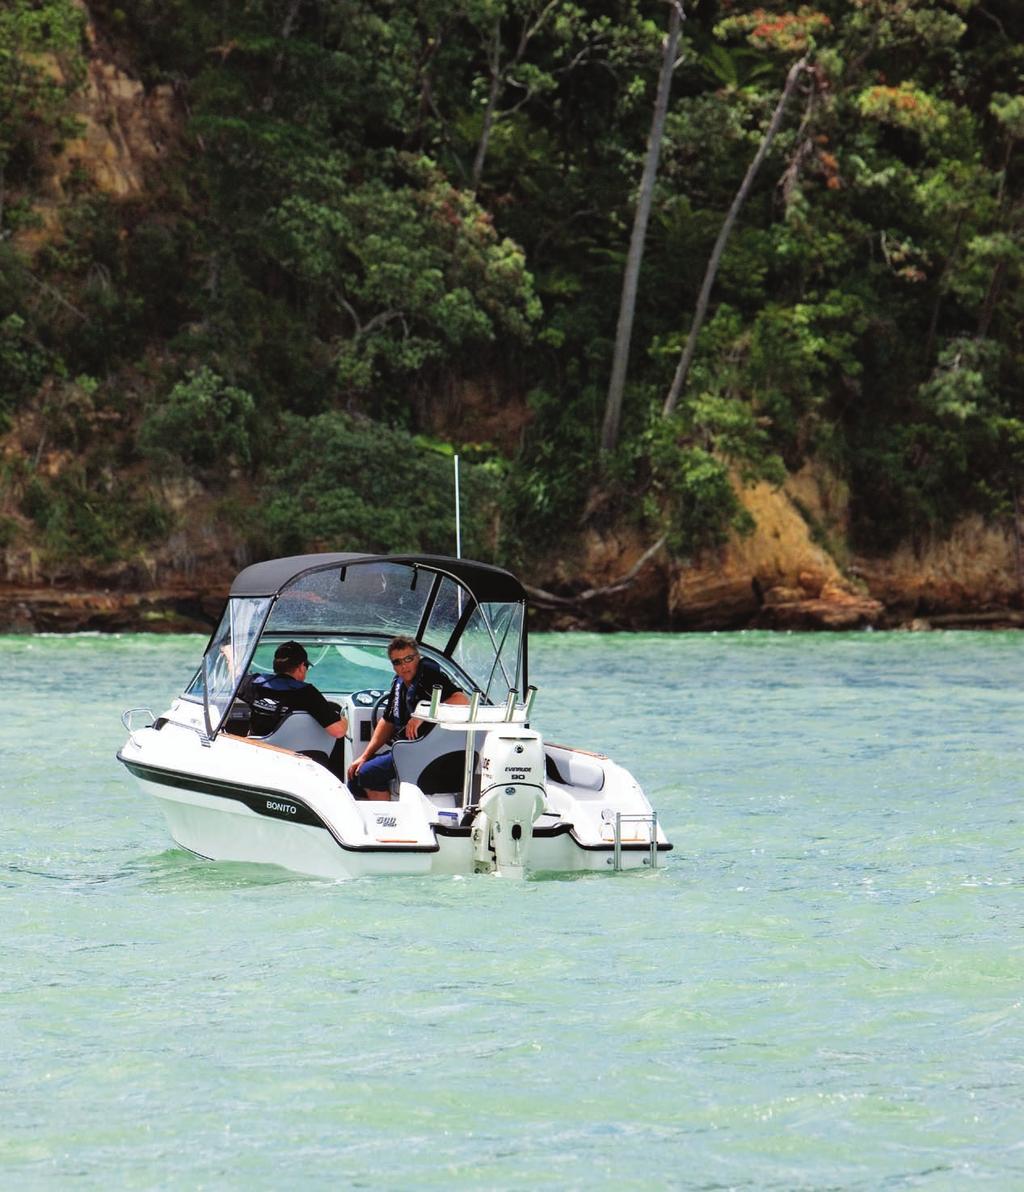 Boating s verdict The Bonito 500 Sprint is a capable little boat with the interior space of a much larger